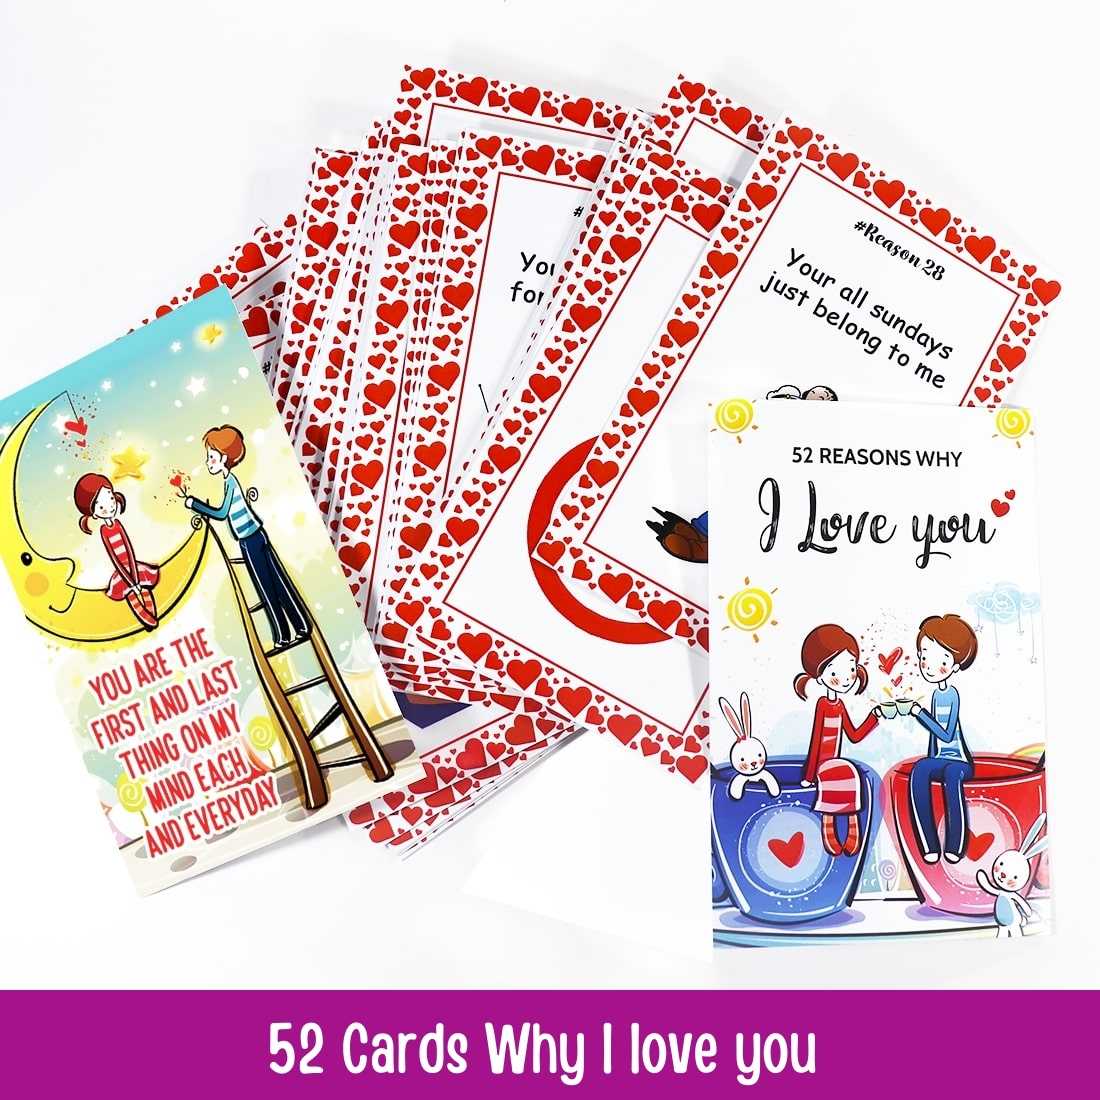 52 Cards Why I love you